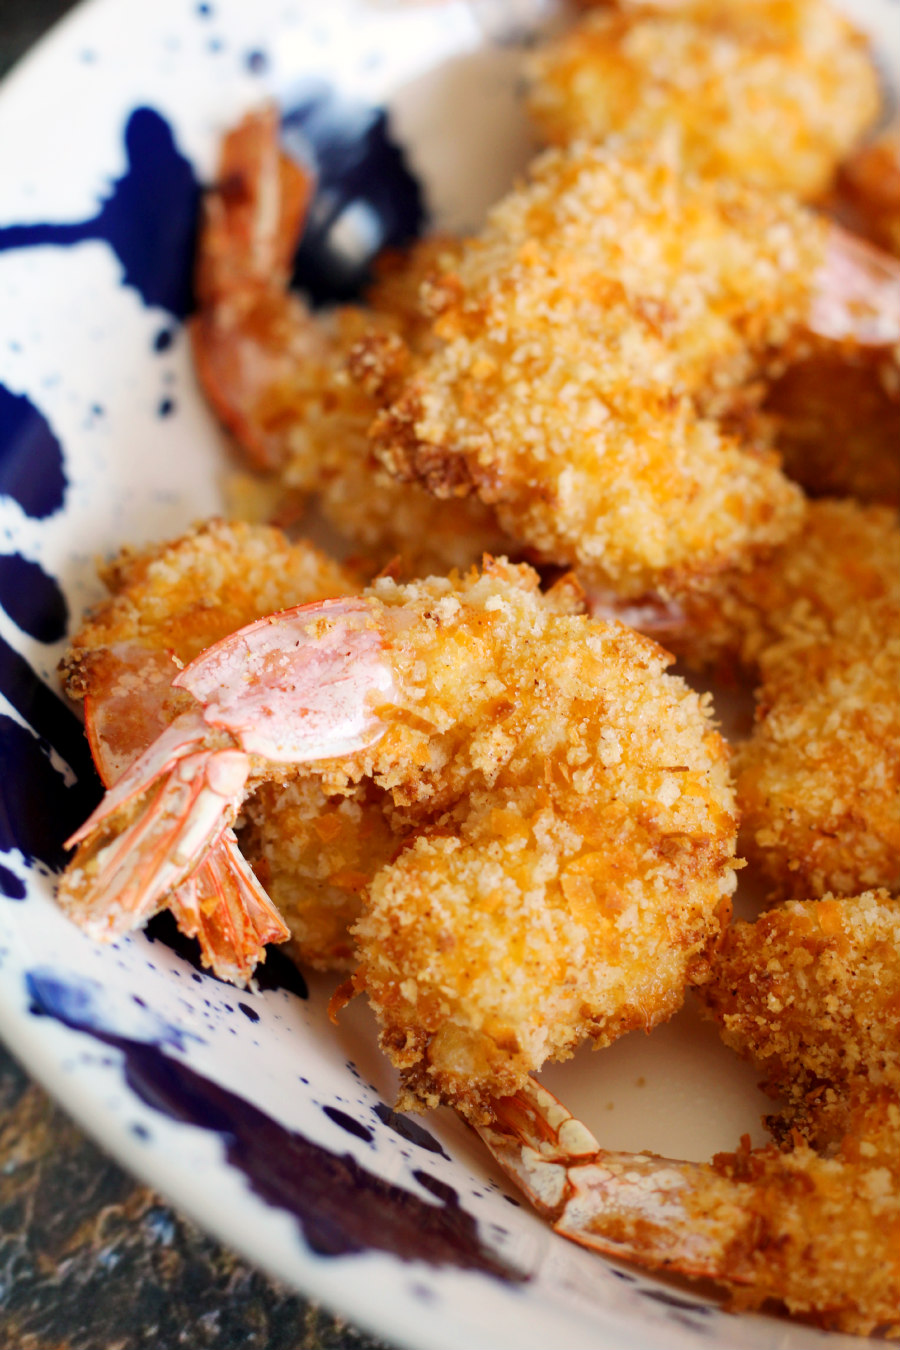 This Air Fryer Coconut Shrimp delivers crispy, tasty shrimp that's healthier than the popular classic, fried coconut shrimp, and it's ready in 10 minutes or less. Serve with Sweet Chili Apricot Sauce for a simple appetizer or with a salad for an easy weeknight meal.